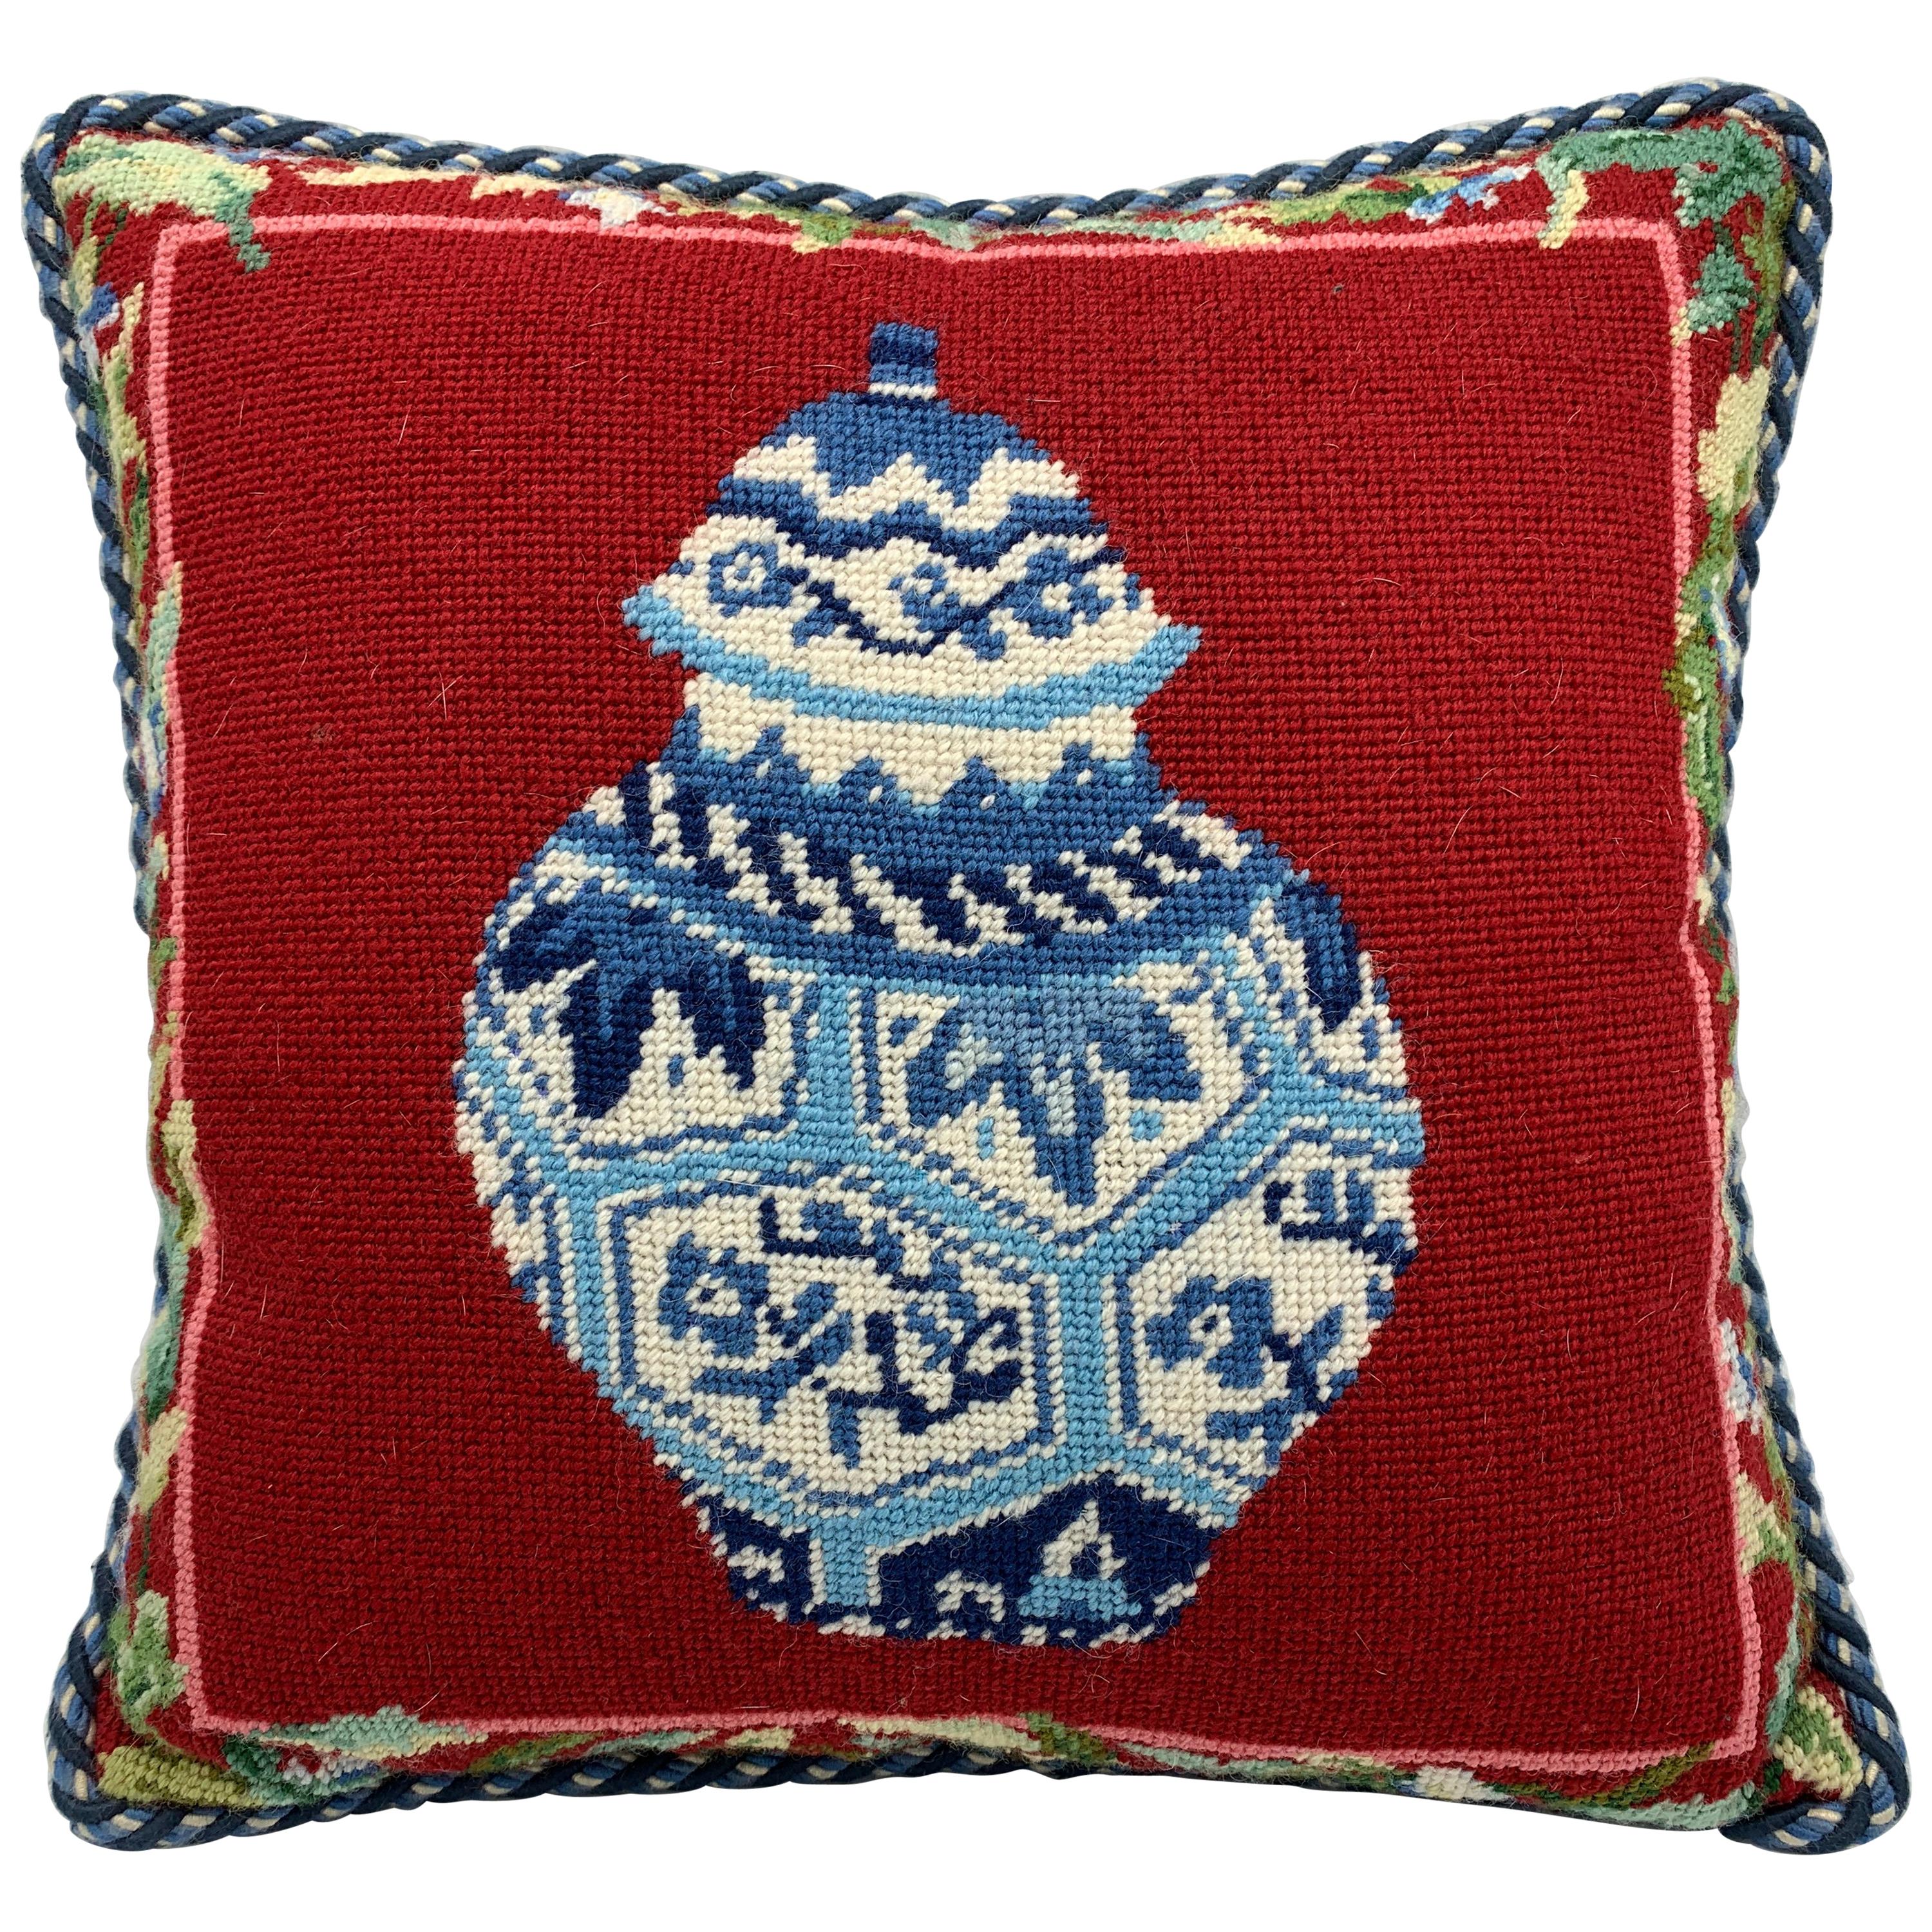 1970s Blue and White Ginger Jar Needlepoint Pillow